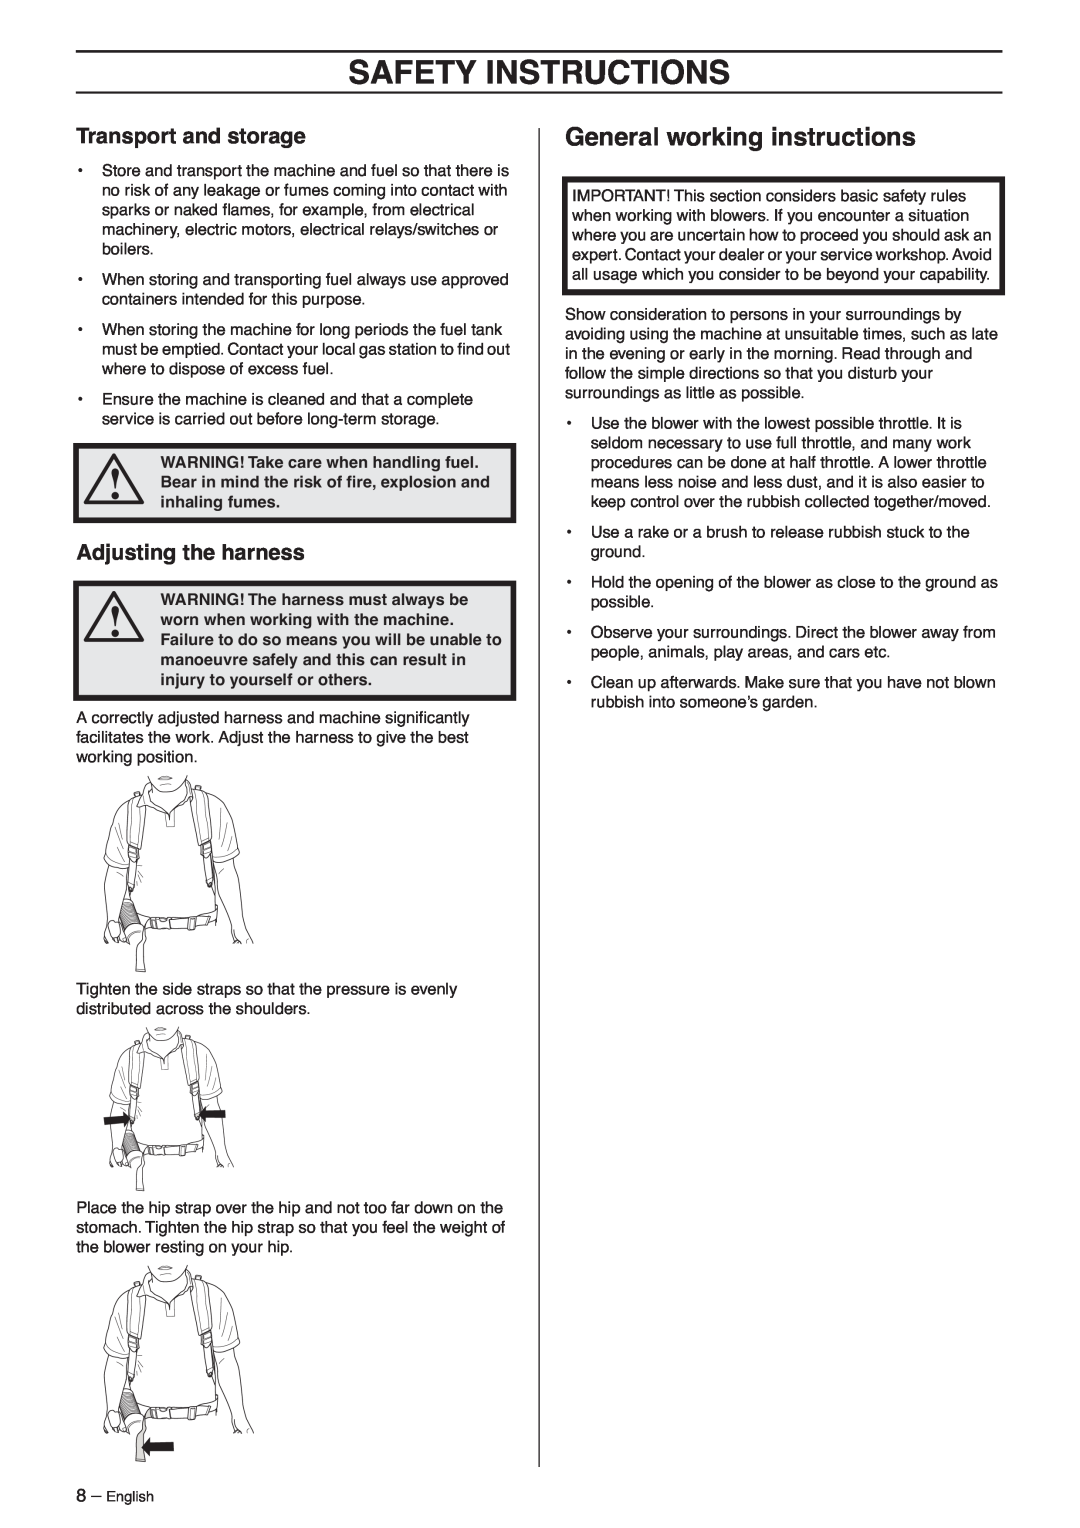 Husqvarna 356BF X-series General working instructions, Transport and storage, Adjusting the harness, Safety Instructions 